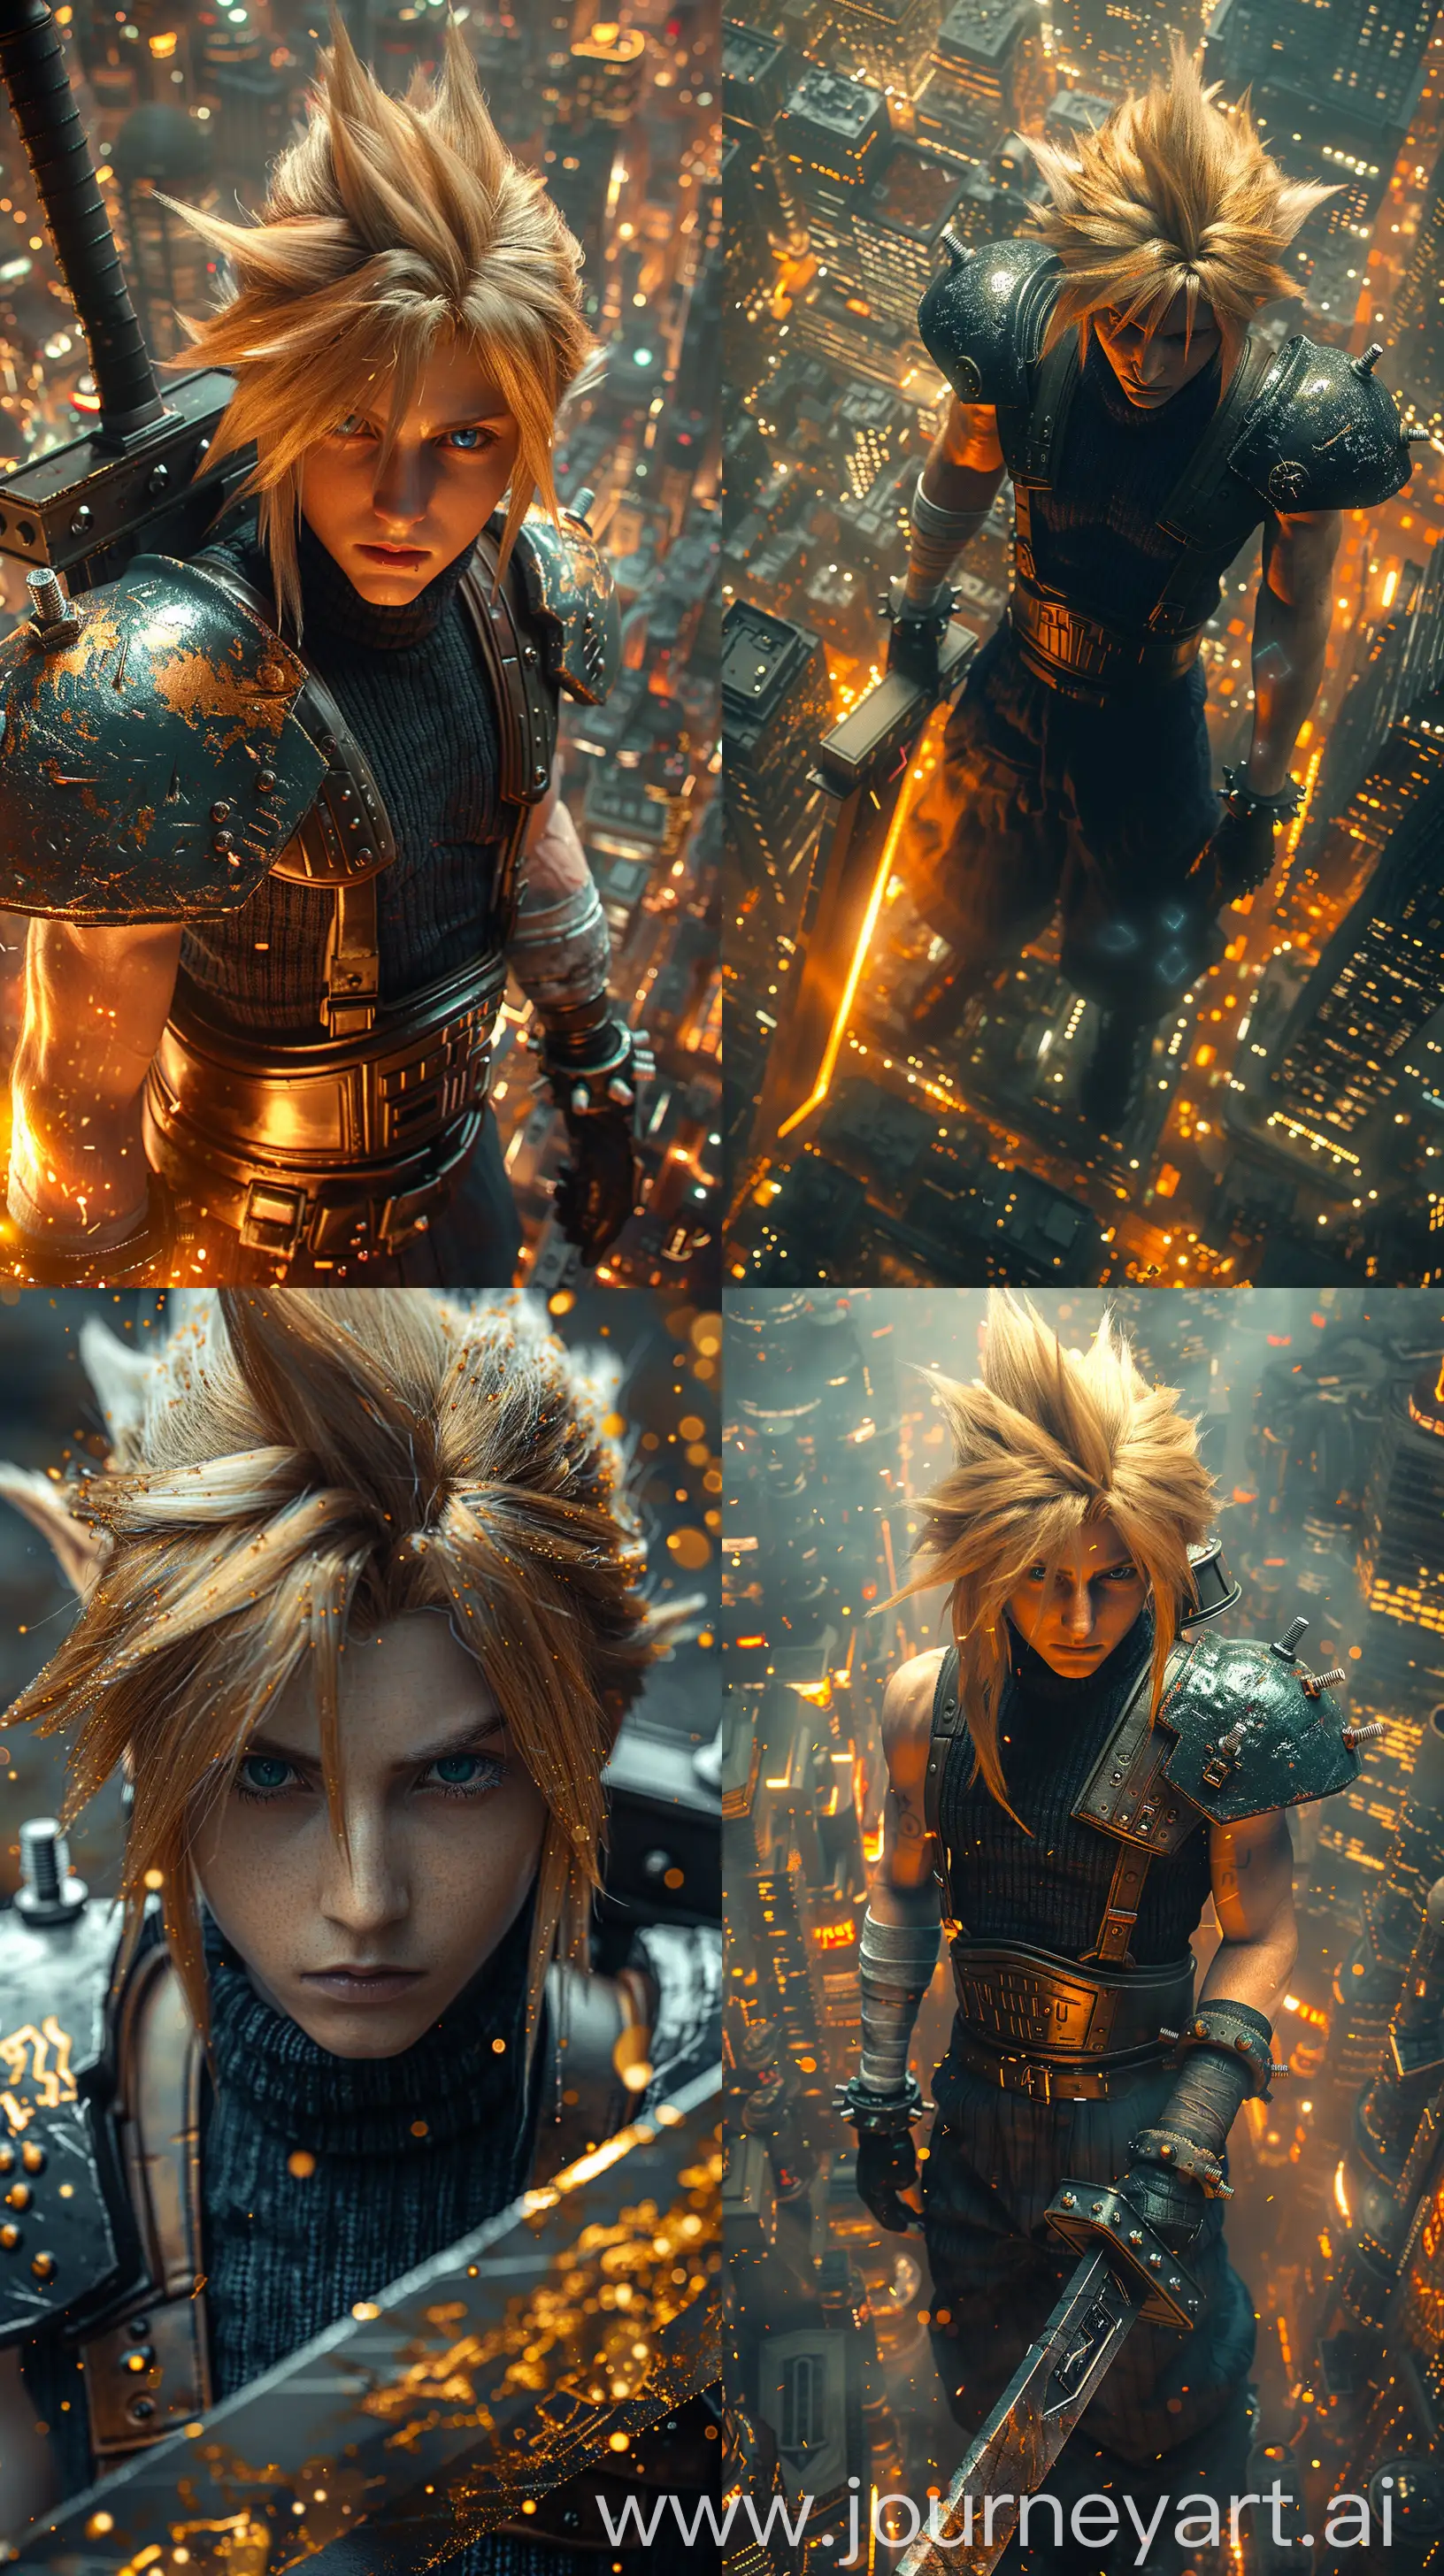 Cloud-Strife-from-Final-Fantasy-Cyberpunk-Portrait-in-Dark-Amber-and-Gold